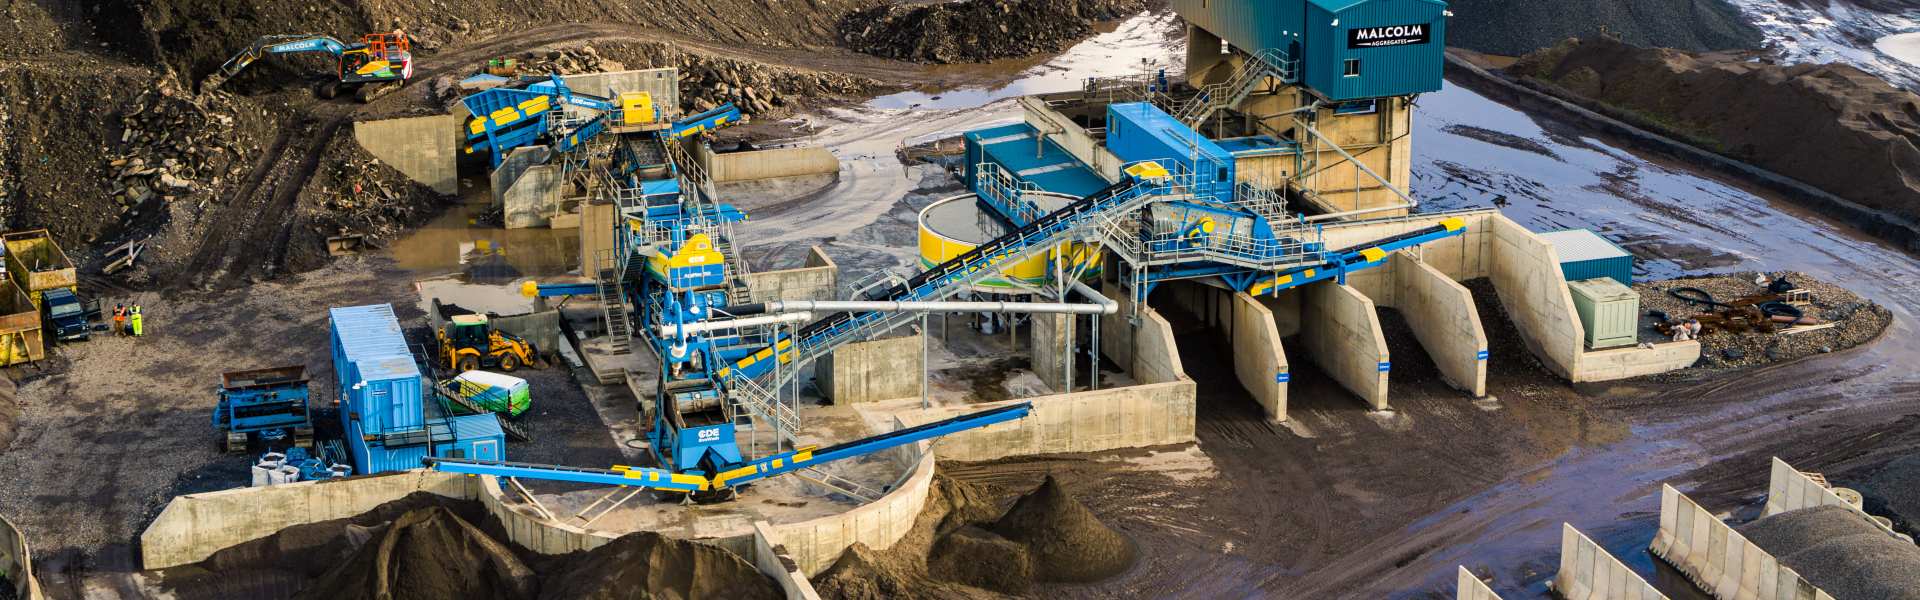 CDE showcase sustainable future for Hard Rock Quarries at upcoming Open Day Event 